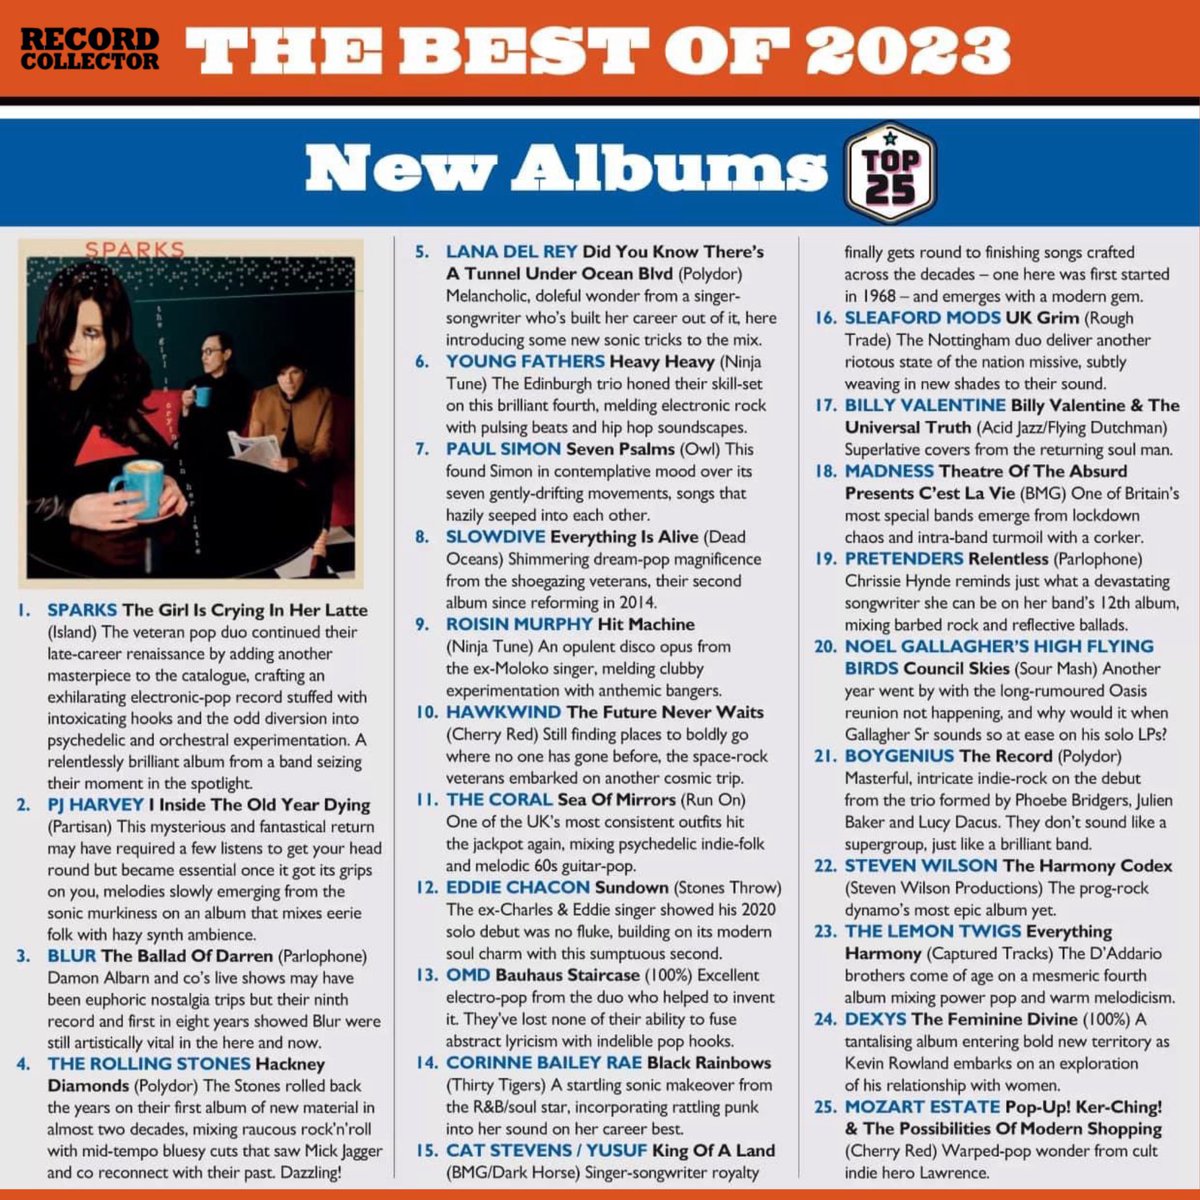 In happy end-of-the-year news, #TheGirlIsCryingInHerLatte got the No. 1 spot on Record Collector Magazine’s Best New Albums of 2023 list! ☕️✨